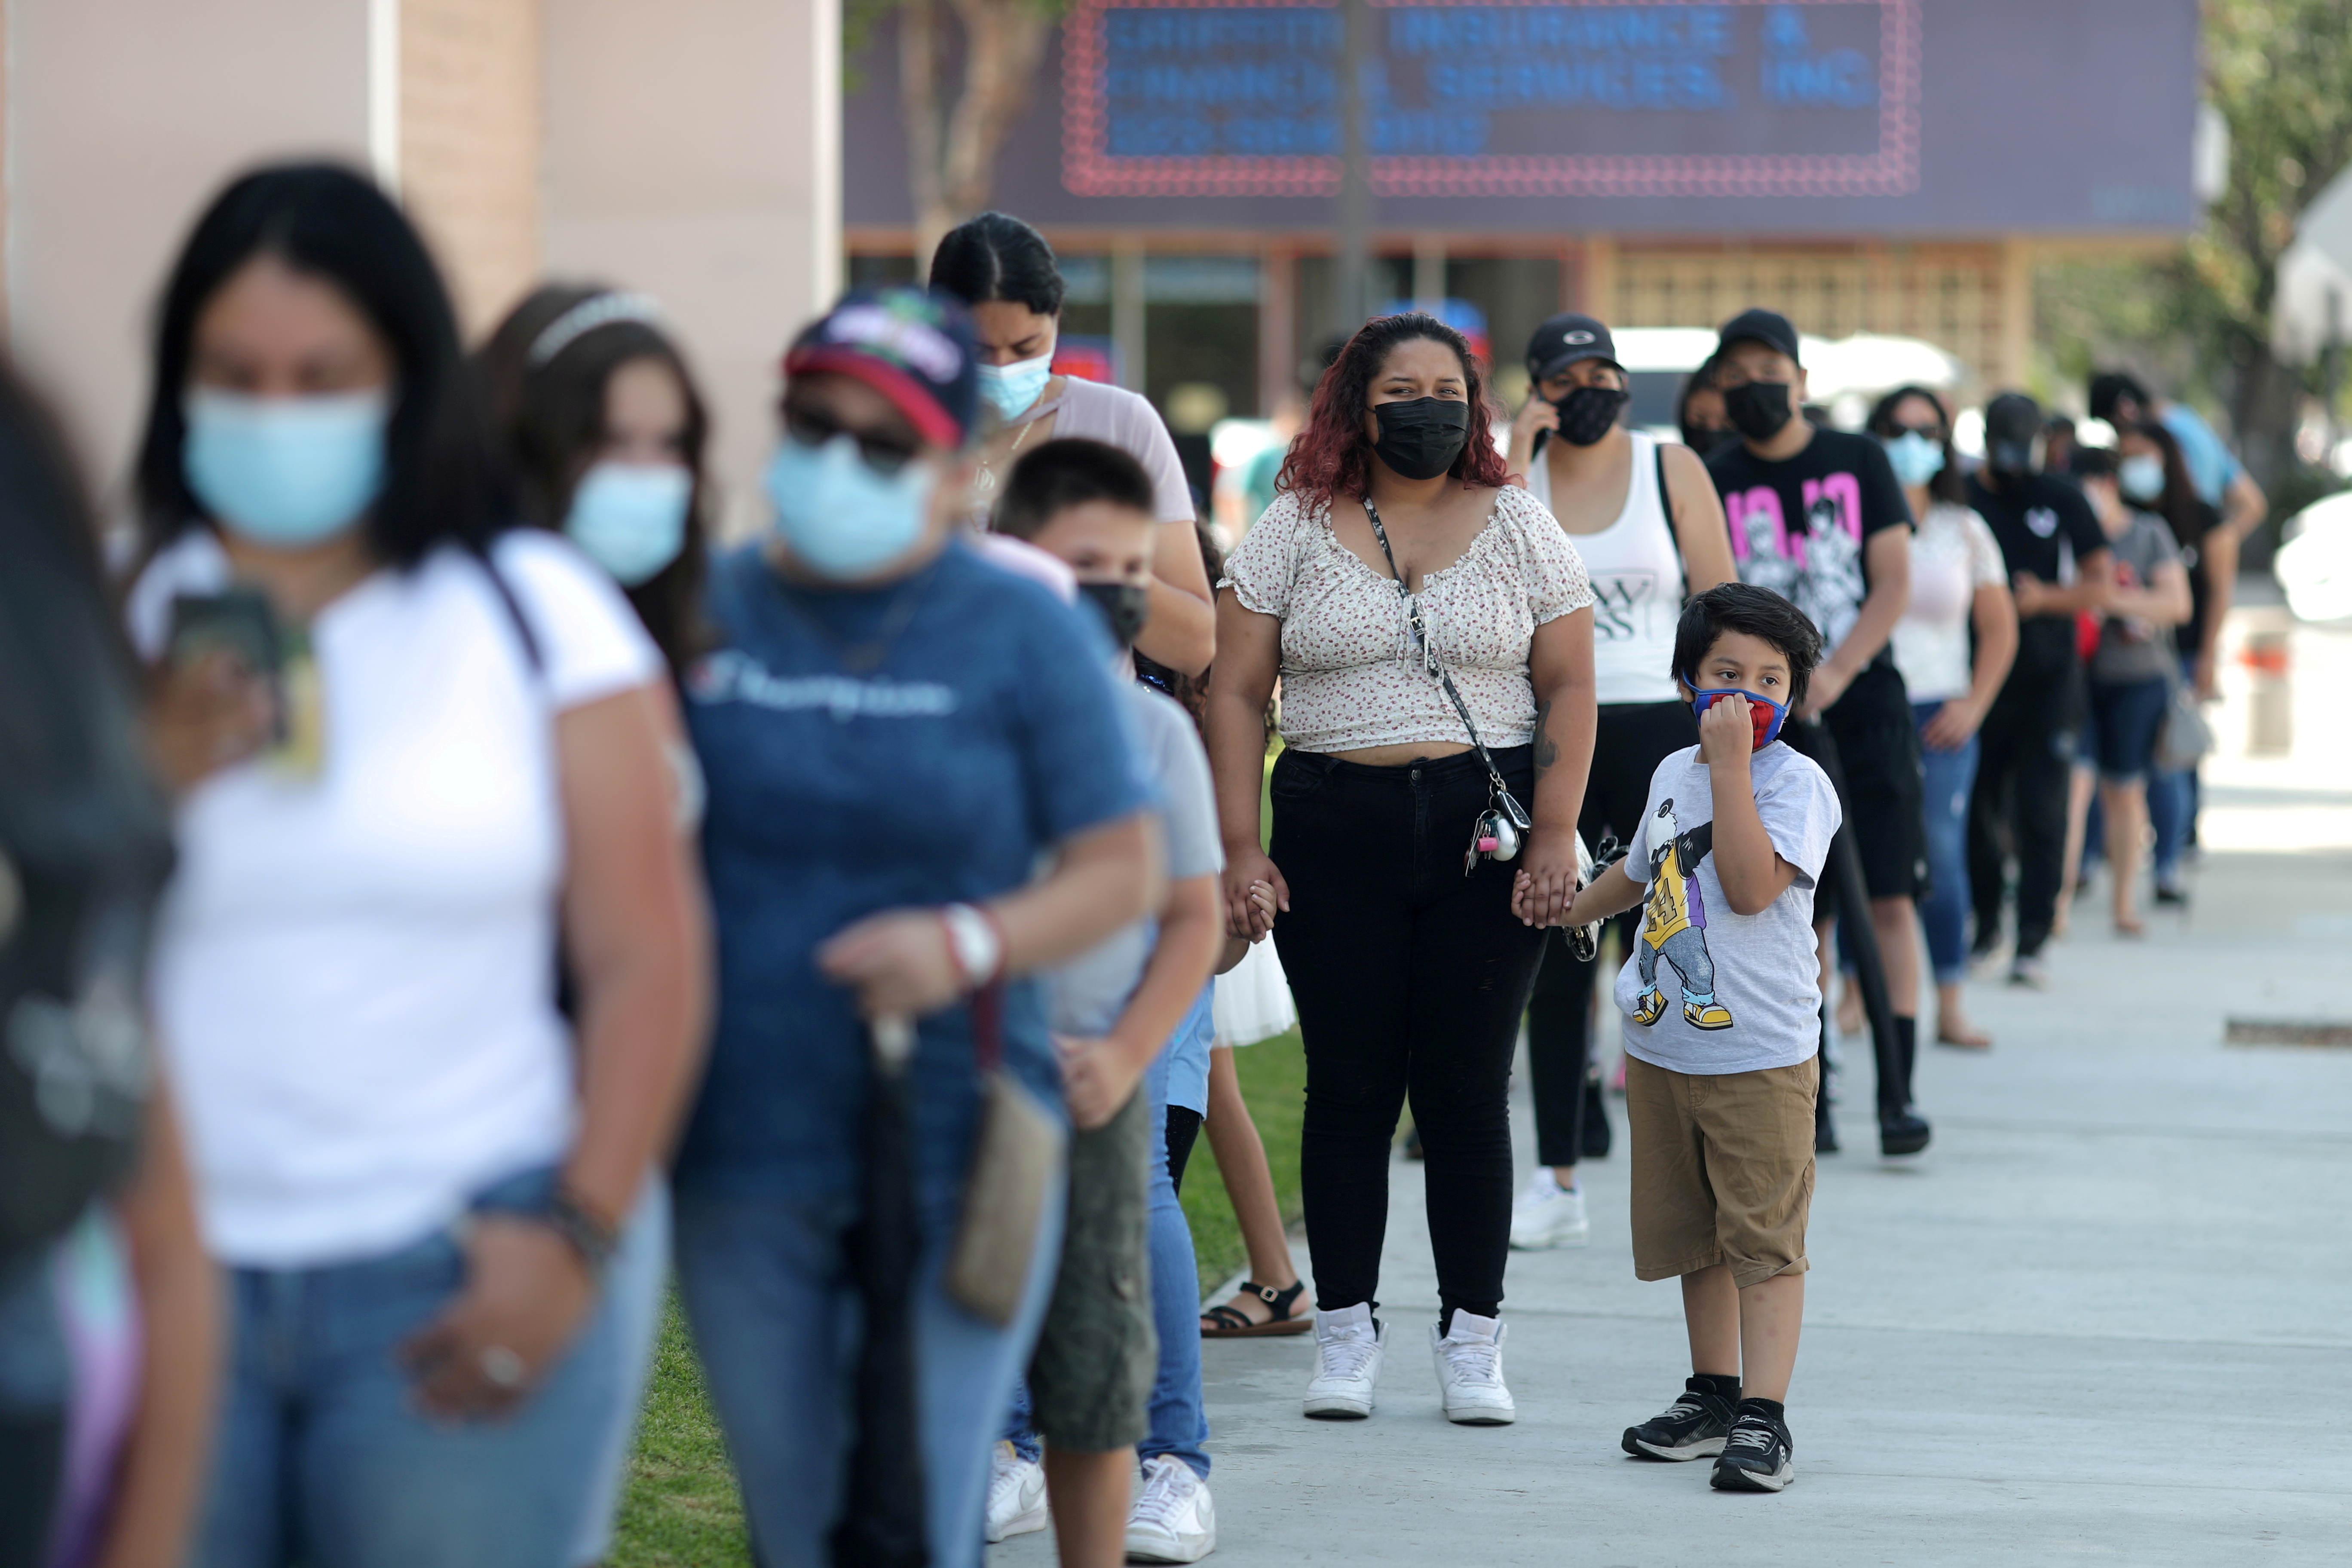 People wait in line for a COVID-19 test at a back-to-school clinic in Los Angeles